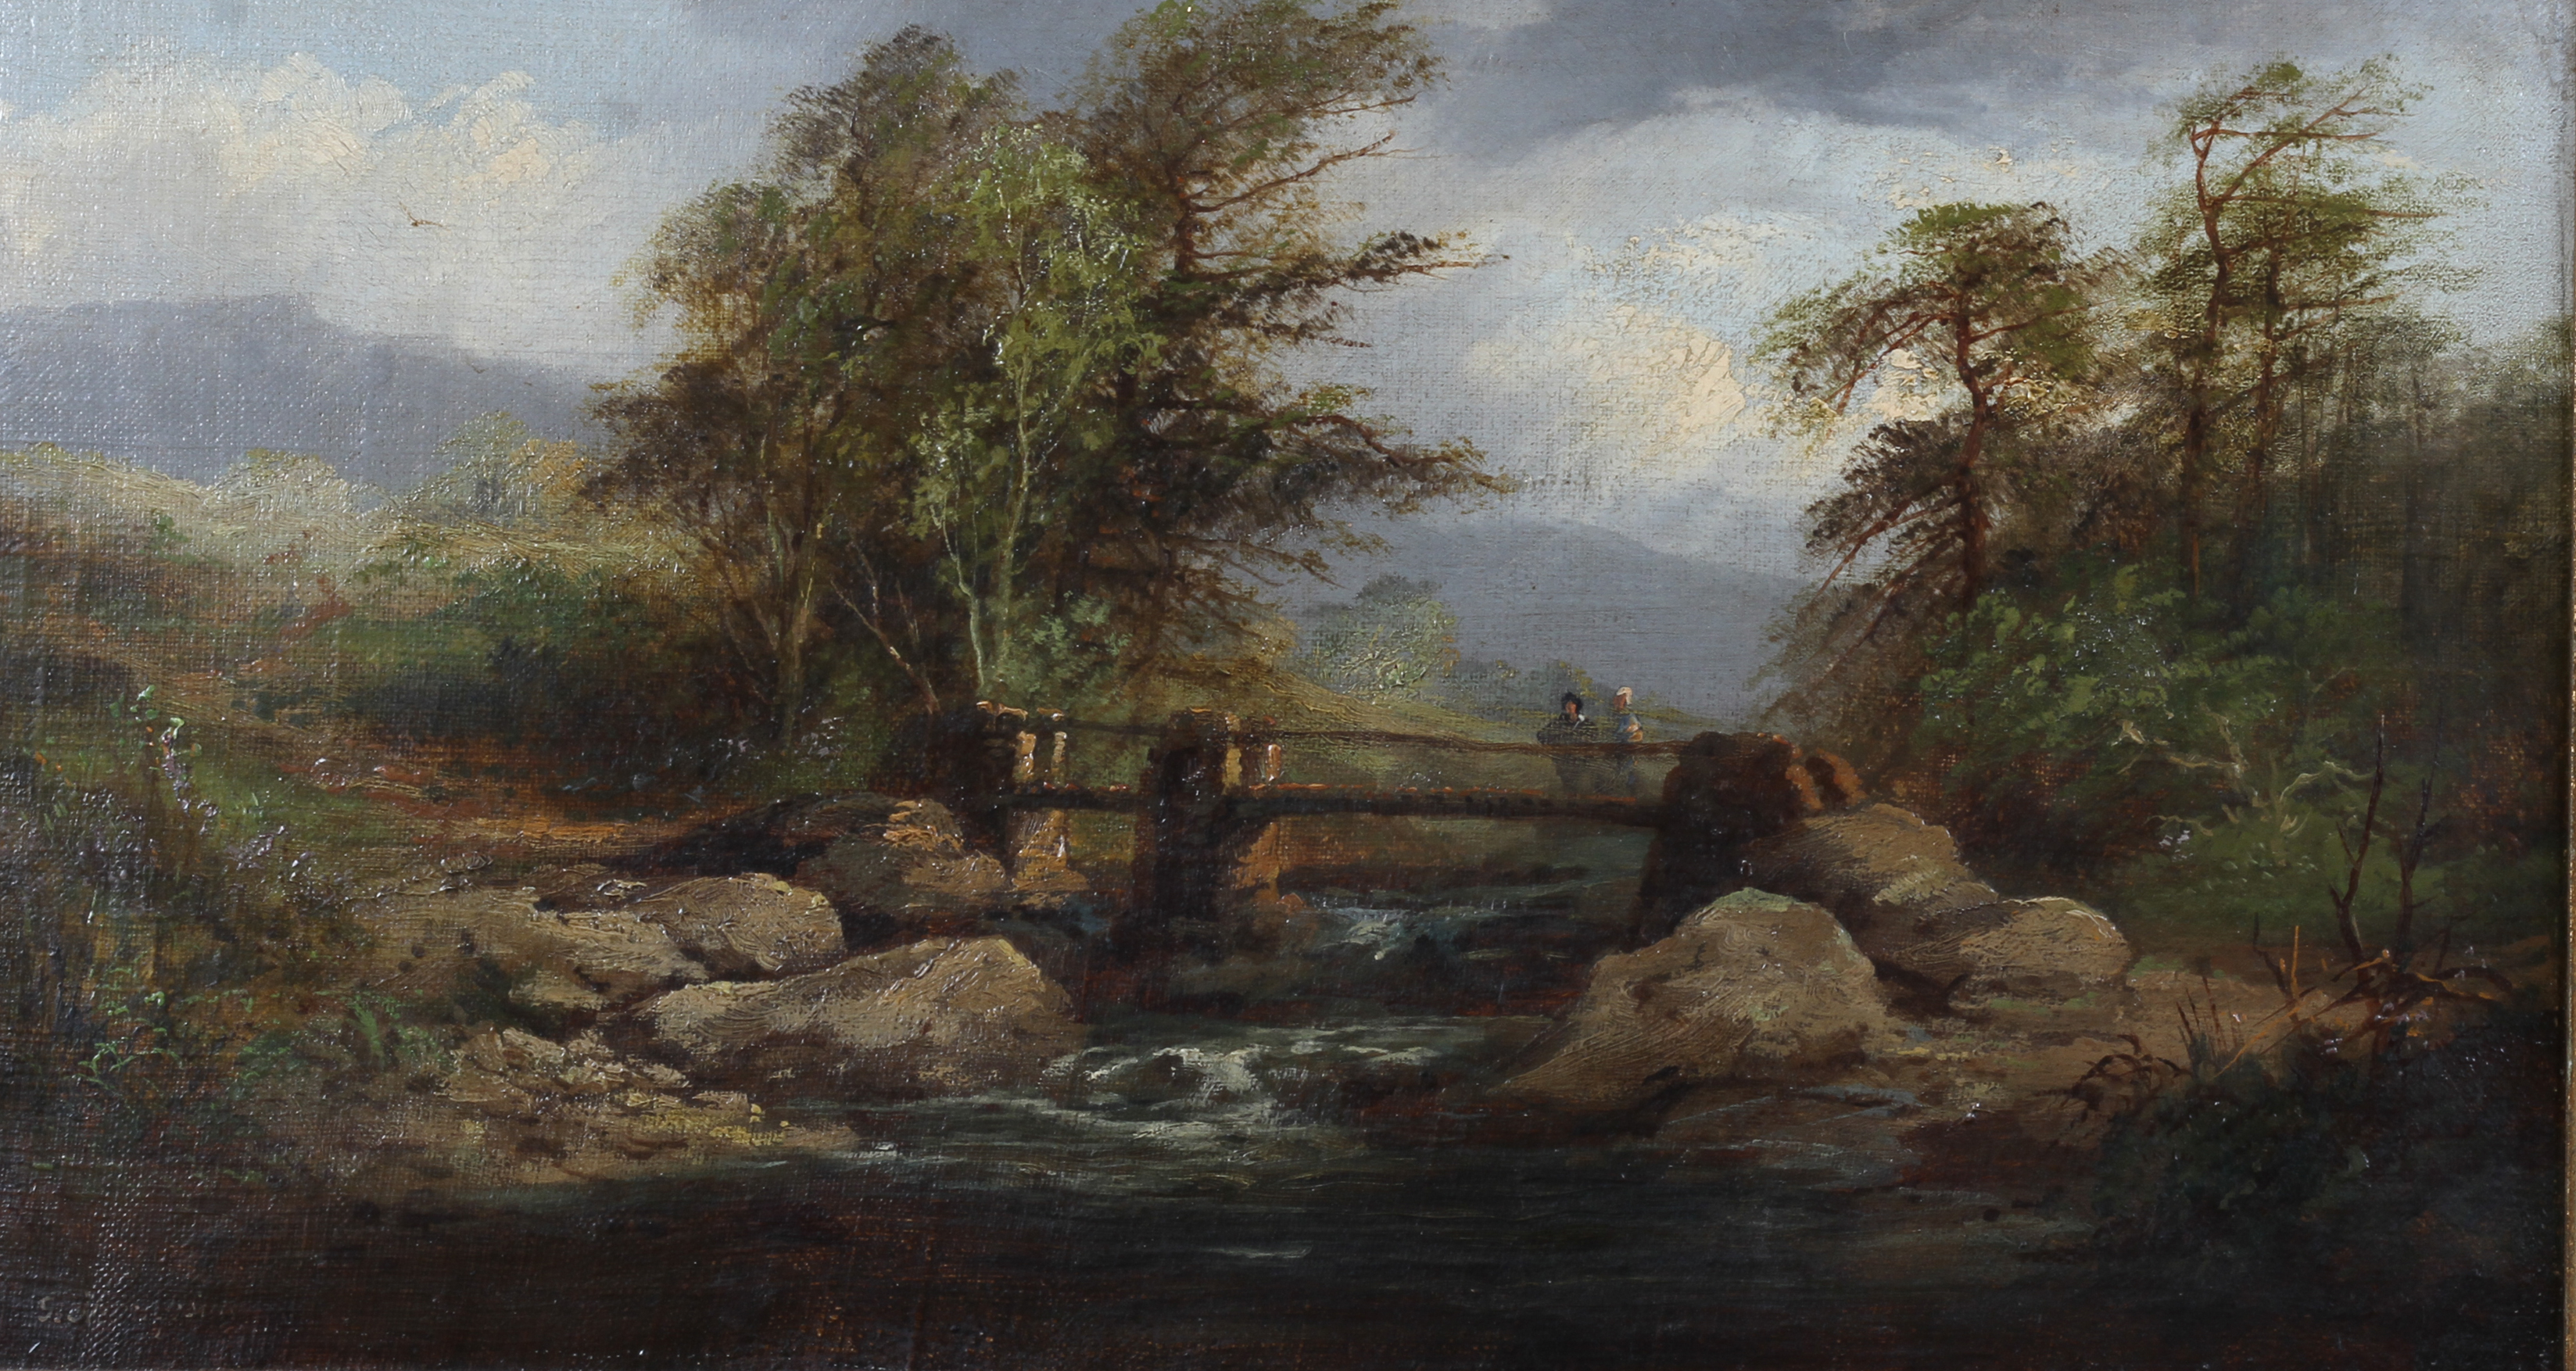 G Thompson, 19th century, Welsh river valley with figures on a bridge, oil on canvas,